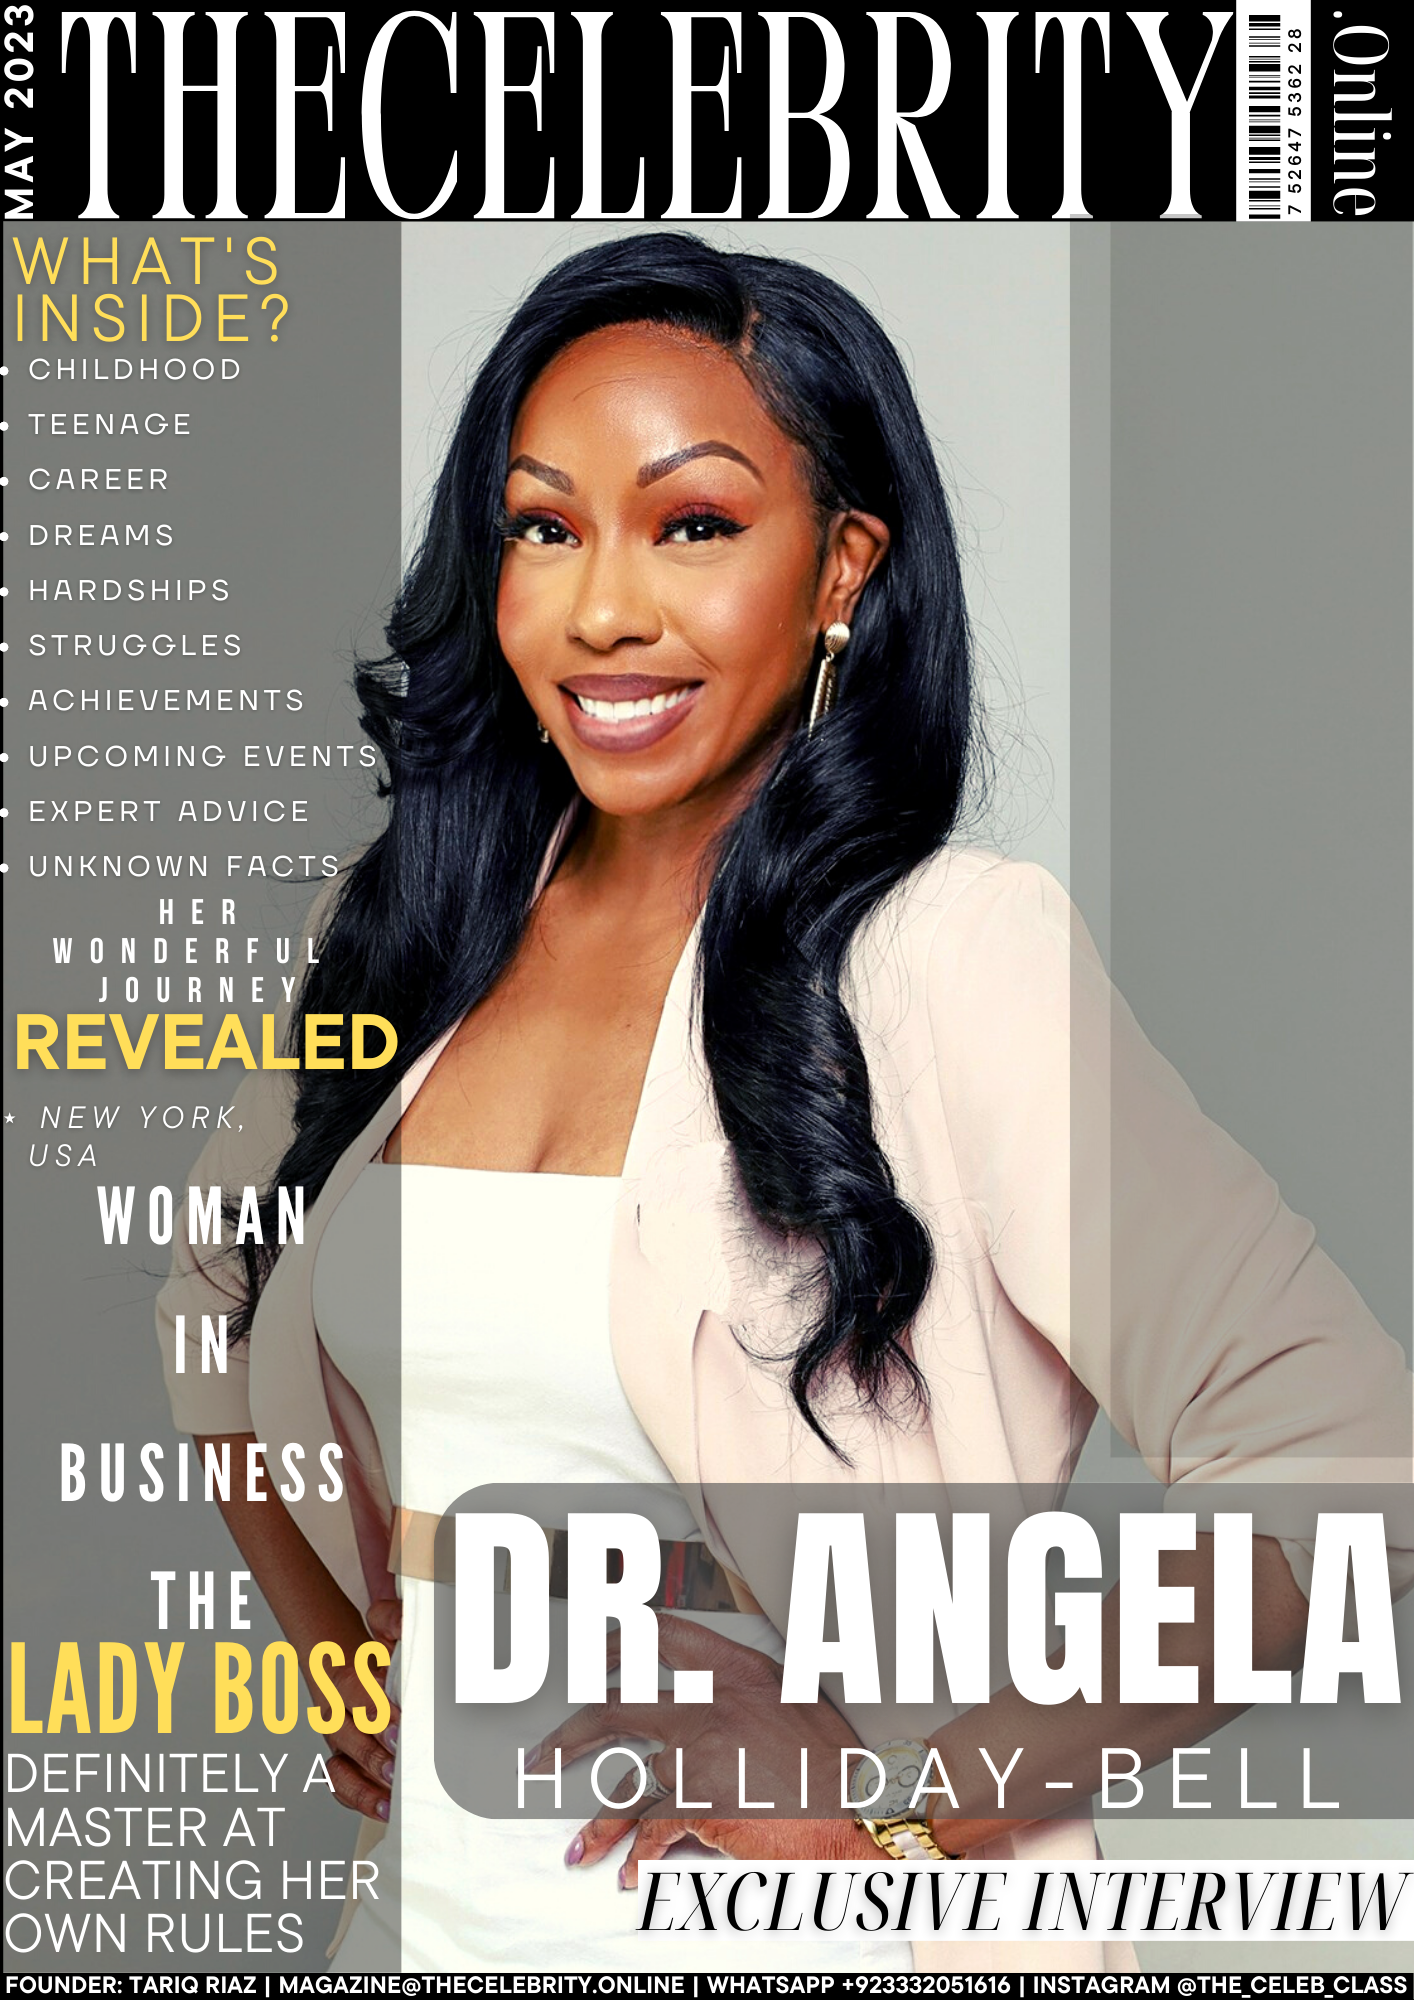 Dr. Angela Holliday-Bell Exclusive Interview – ‘Sleep is the foundation of good health’